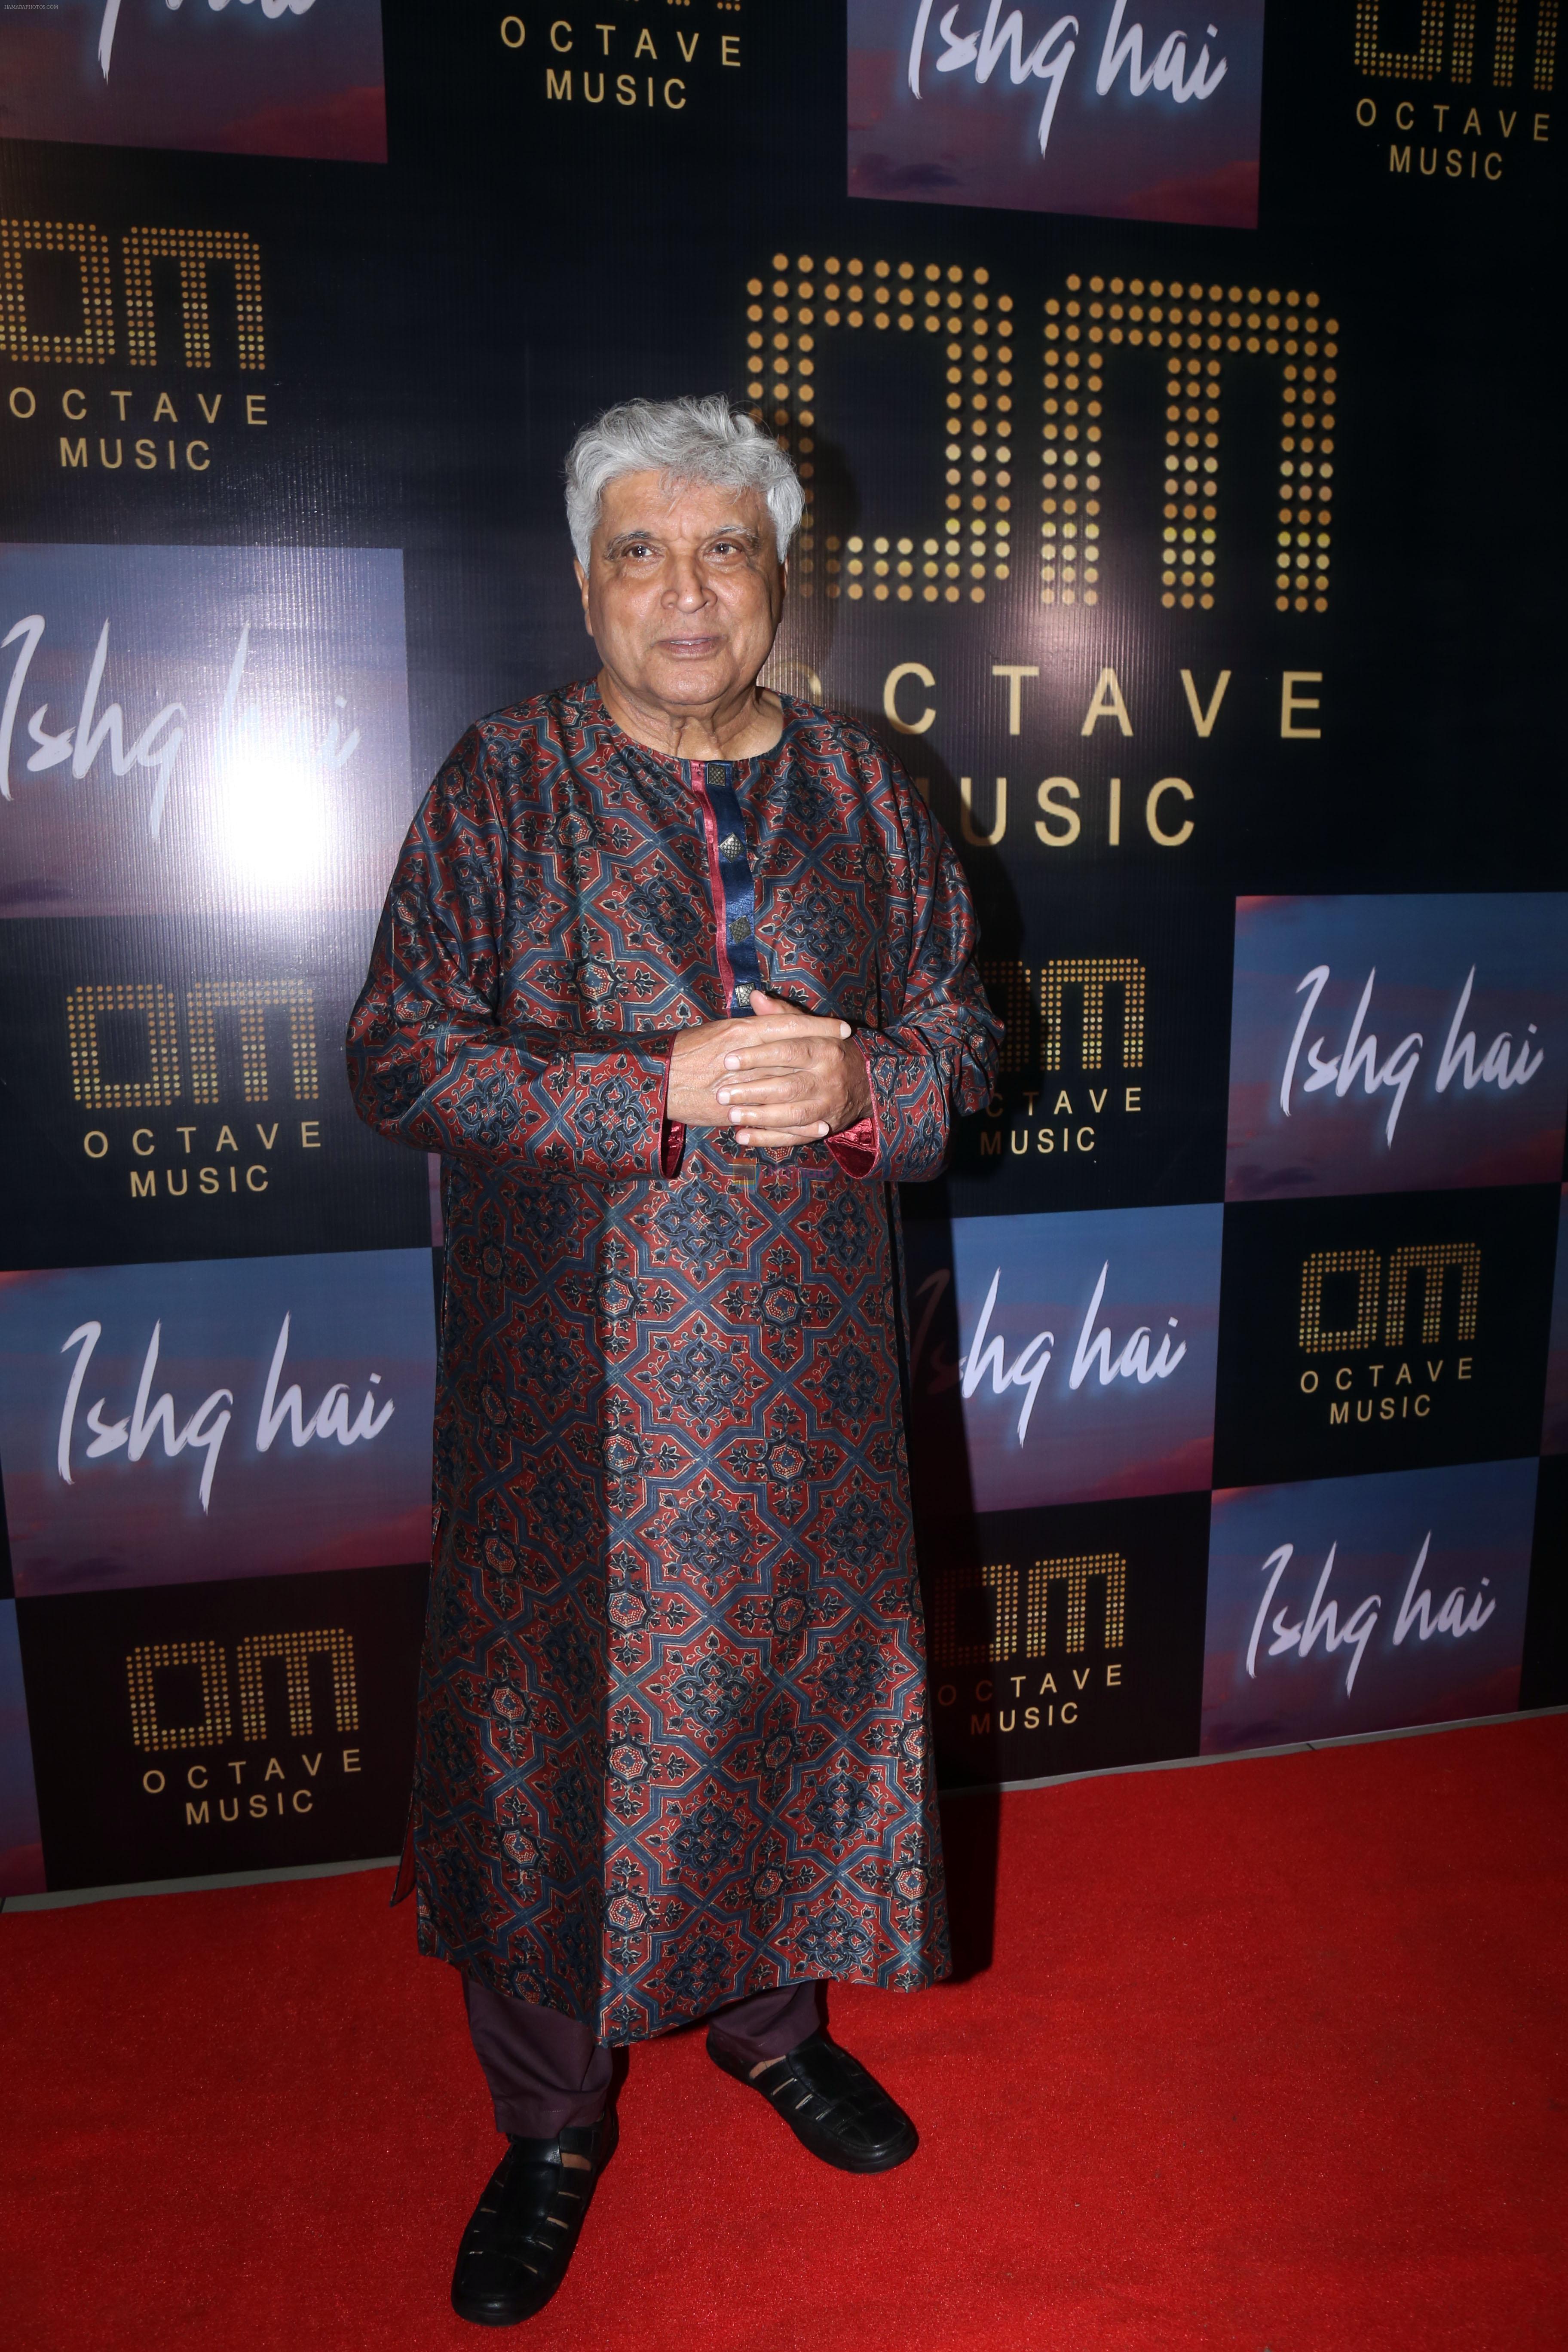 Javed Akhtar at the Launch of Octave Music and Ishq Hai Song on 22nd August 2023